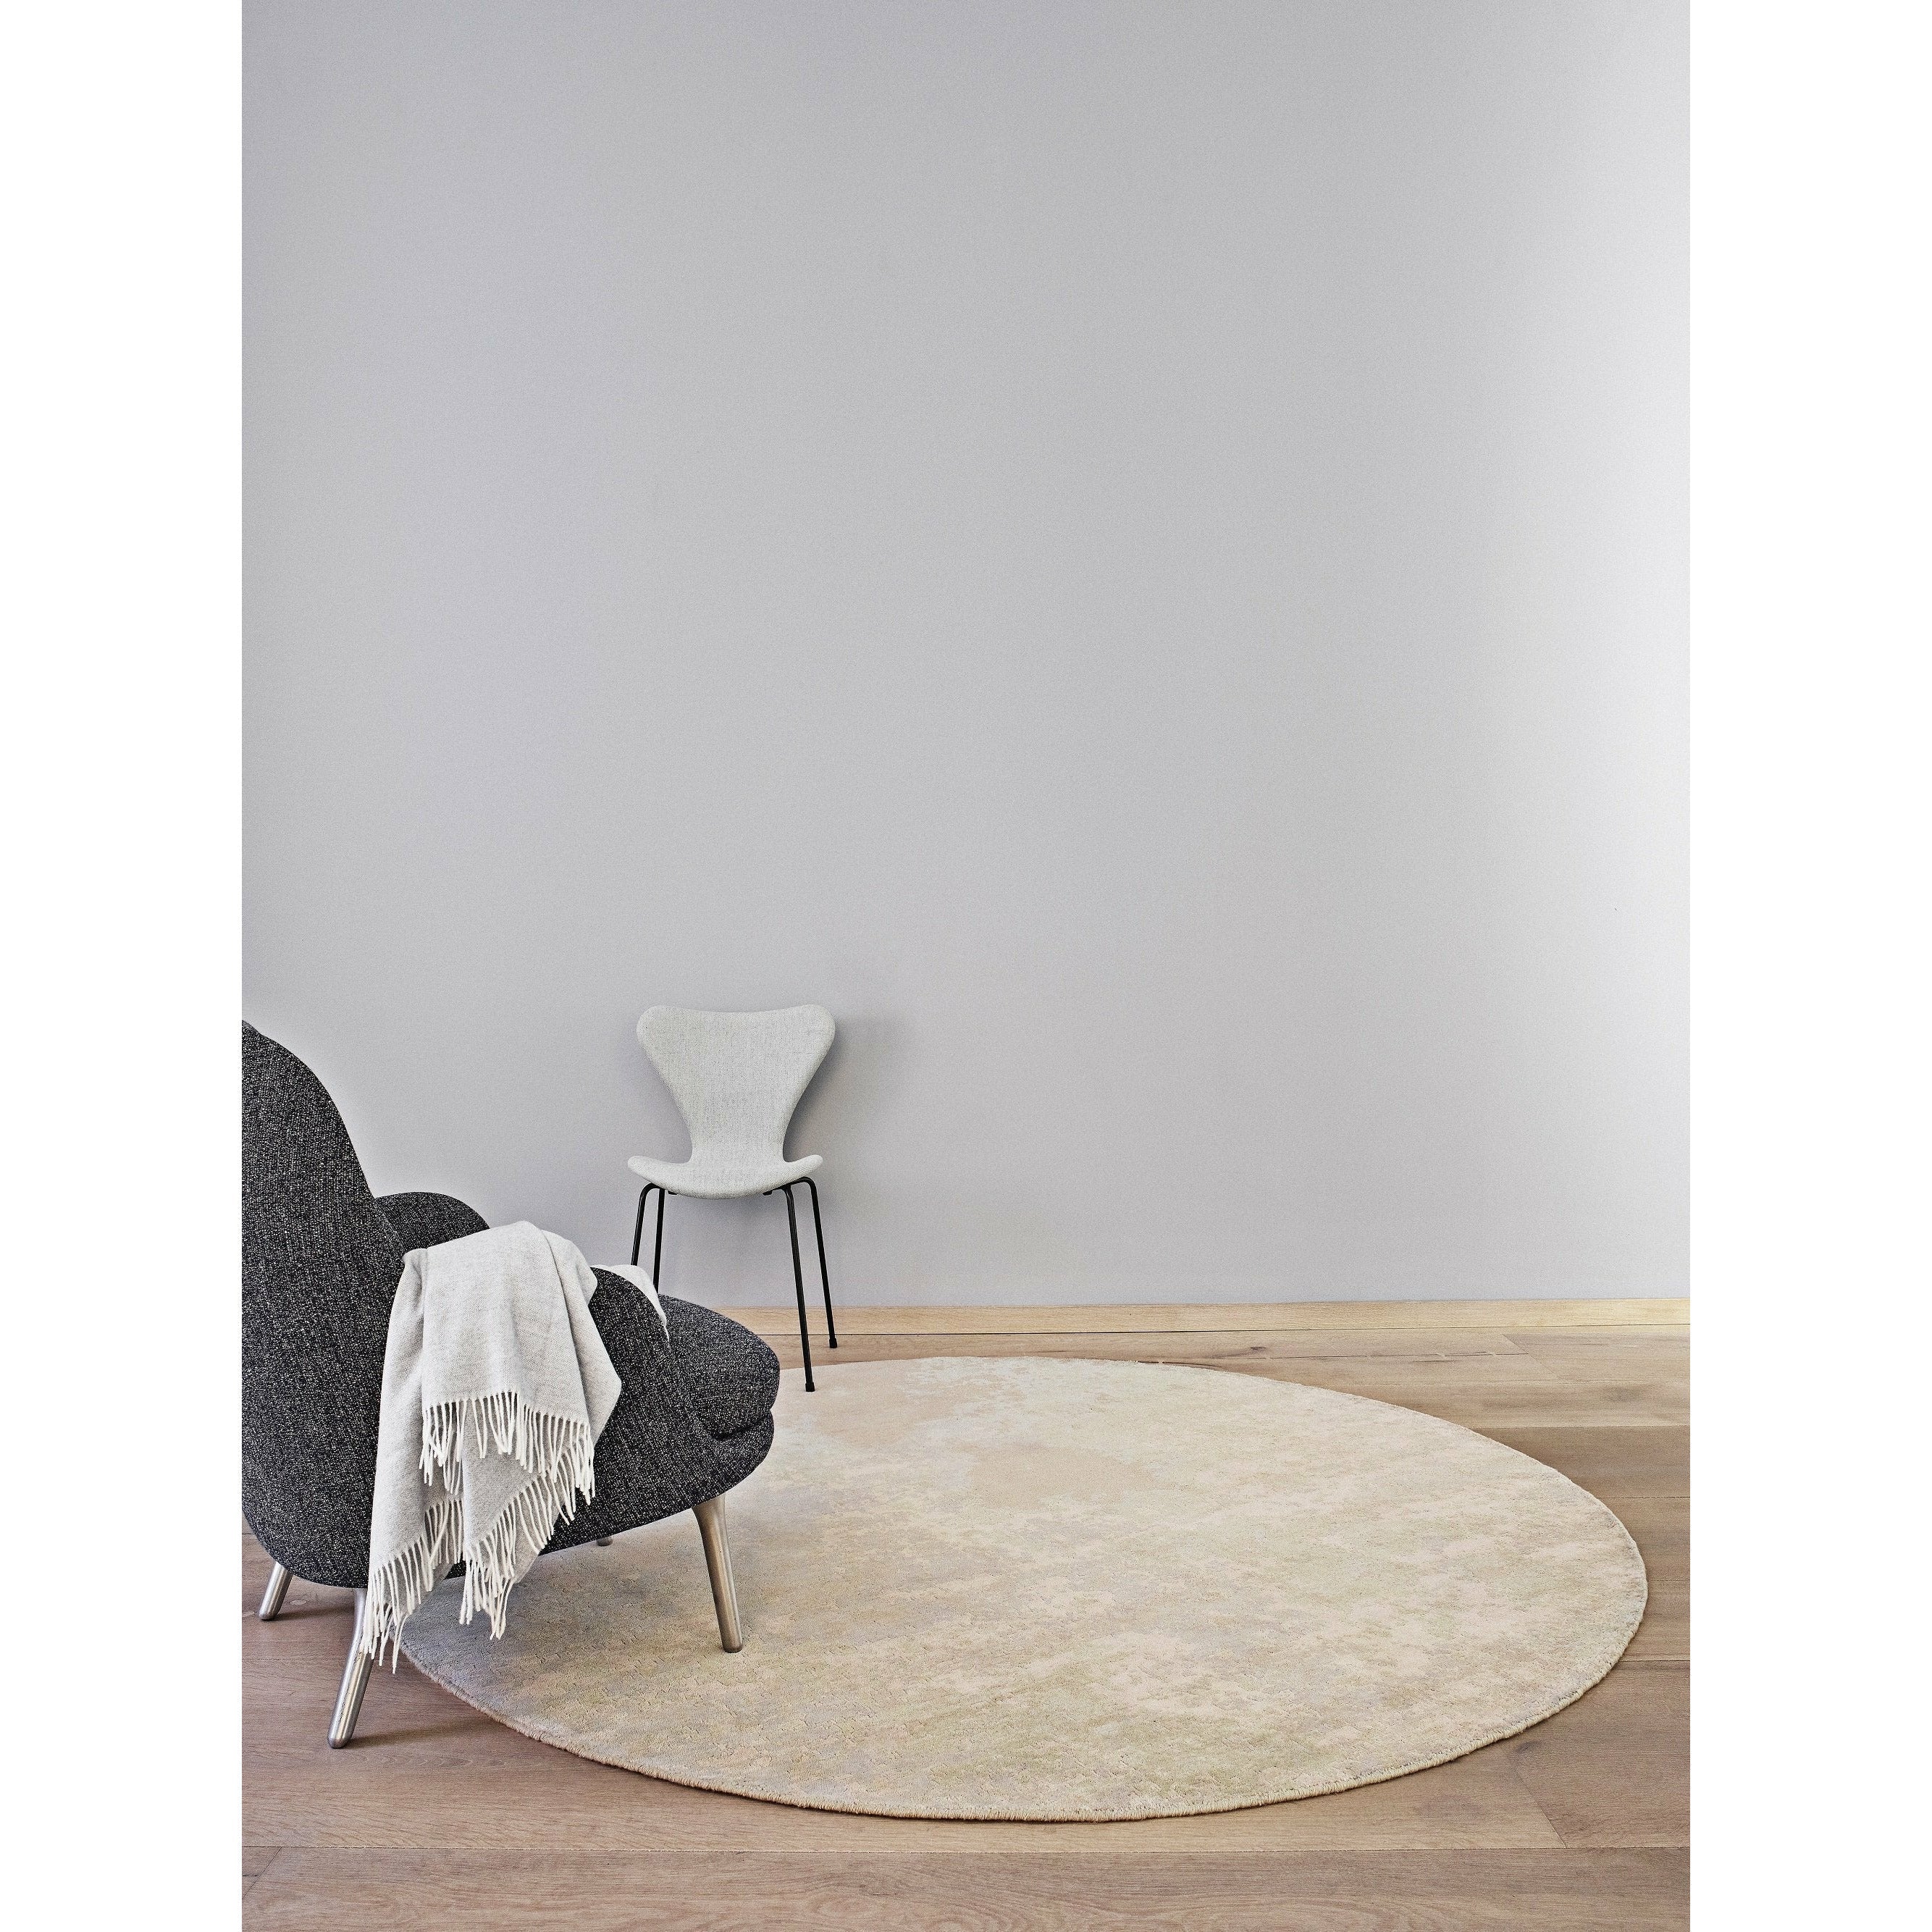 Tapis Massimo Space Surface Terre Bambou, ø 240 Cm